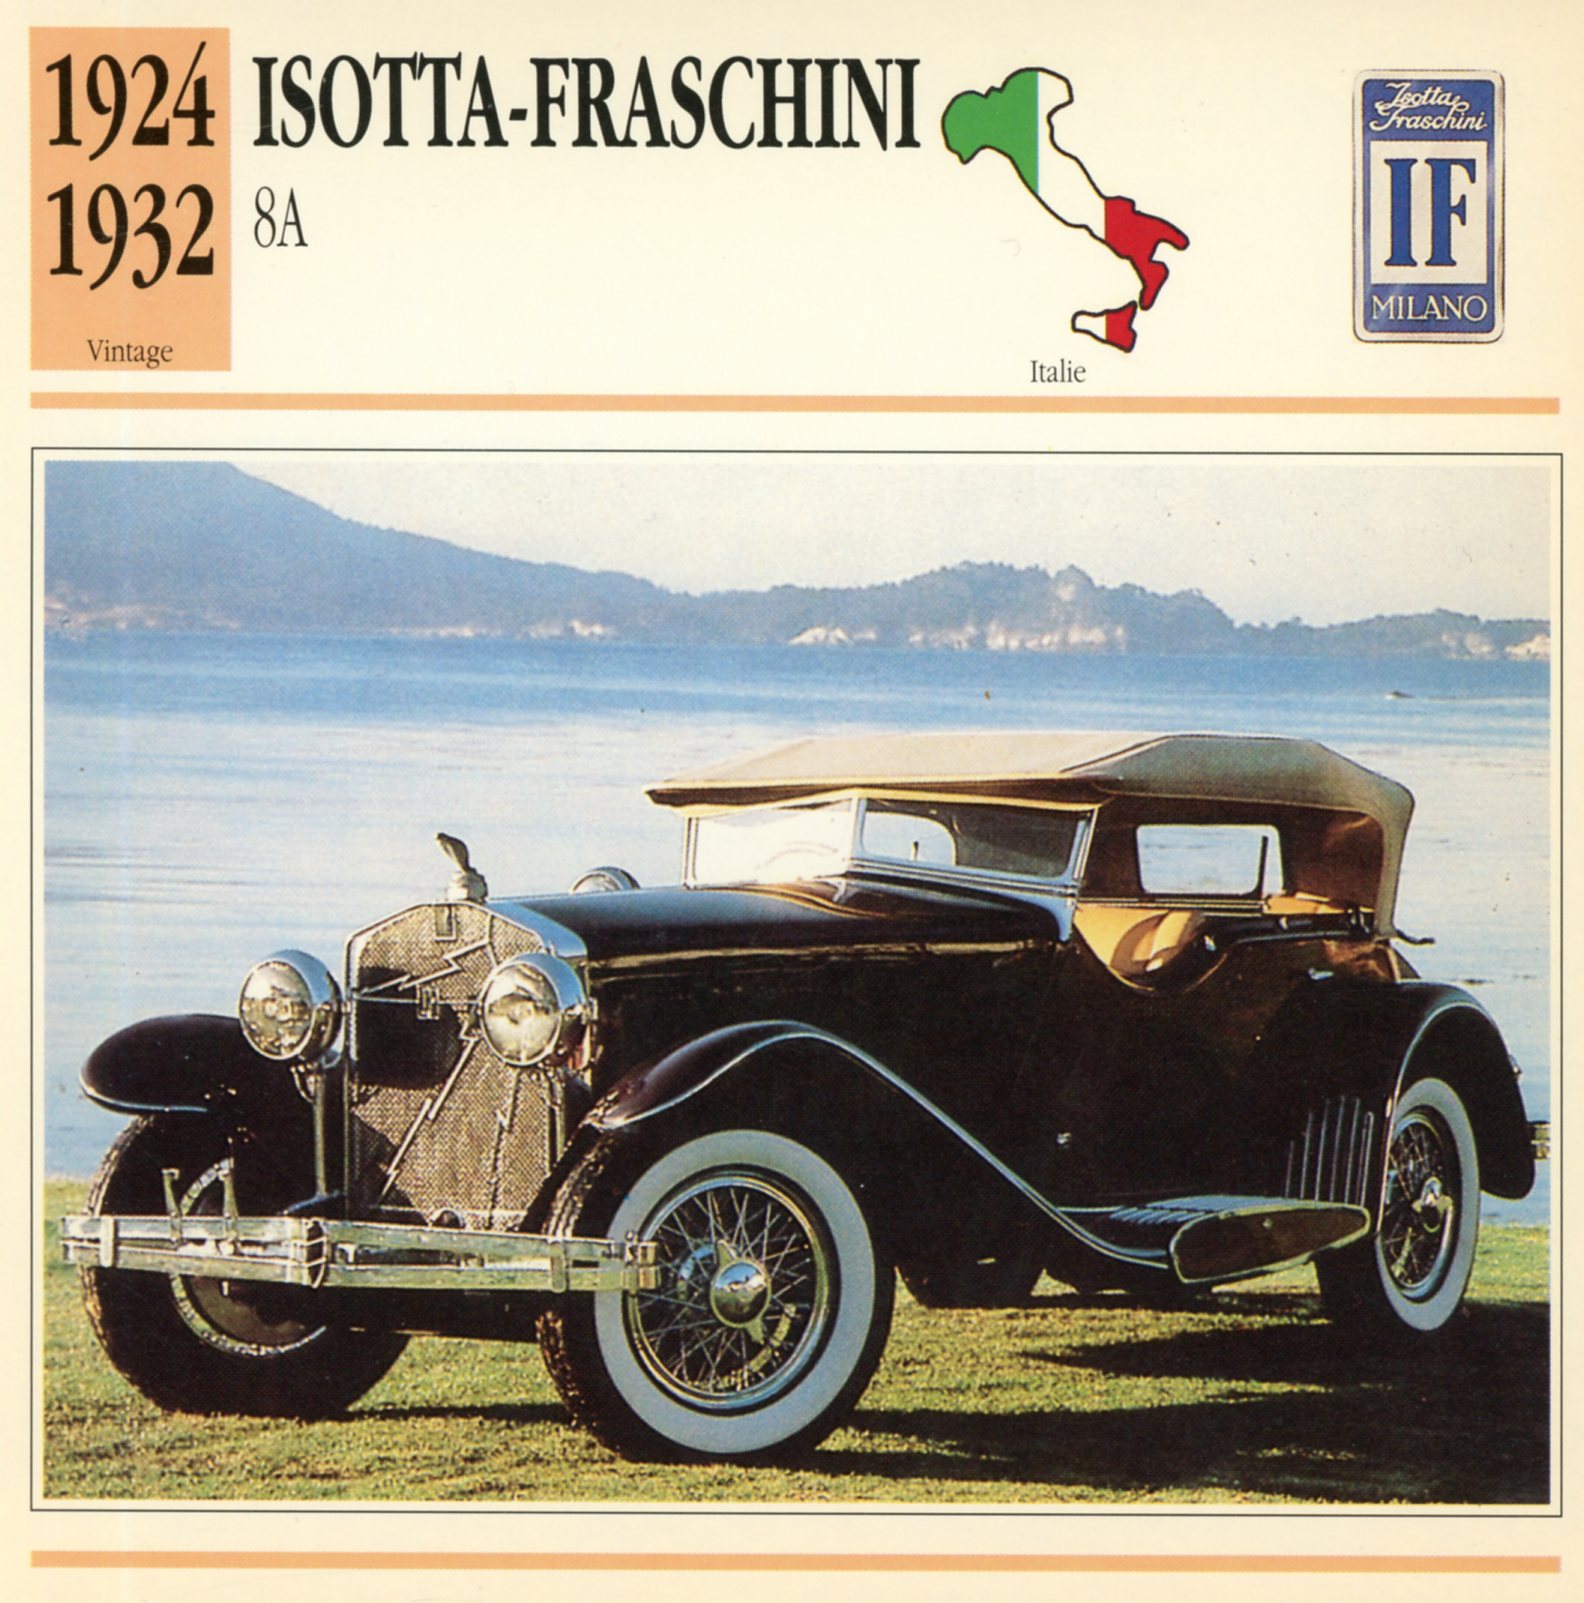 FICHE-AUTO-ISOTTA-FRASCHINI-8A-LEMASTERBROCKERS-CARS-CARD